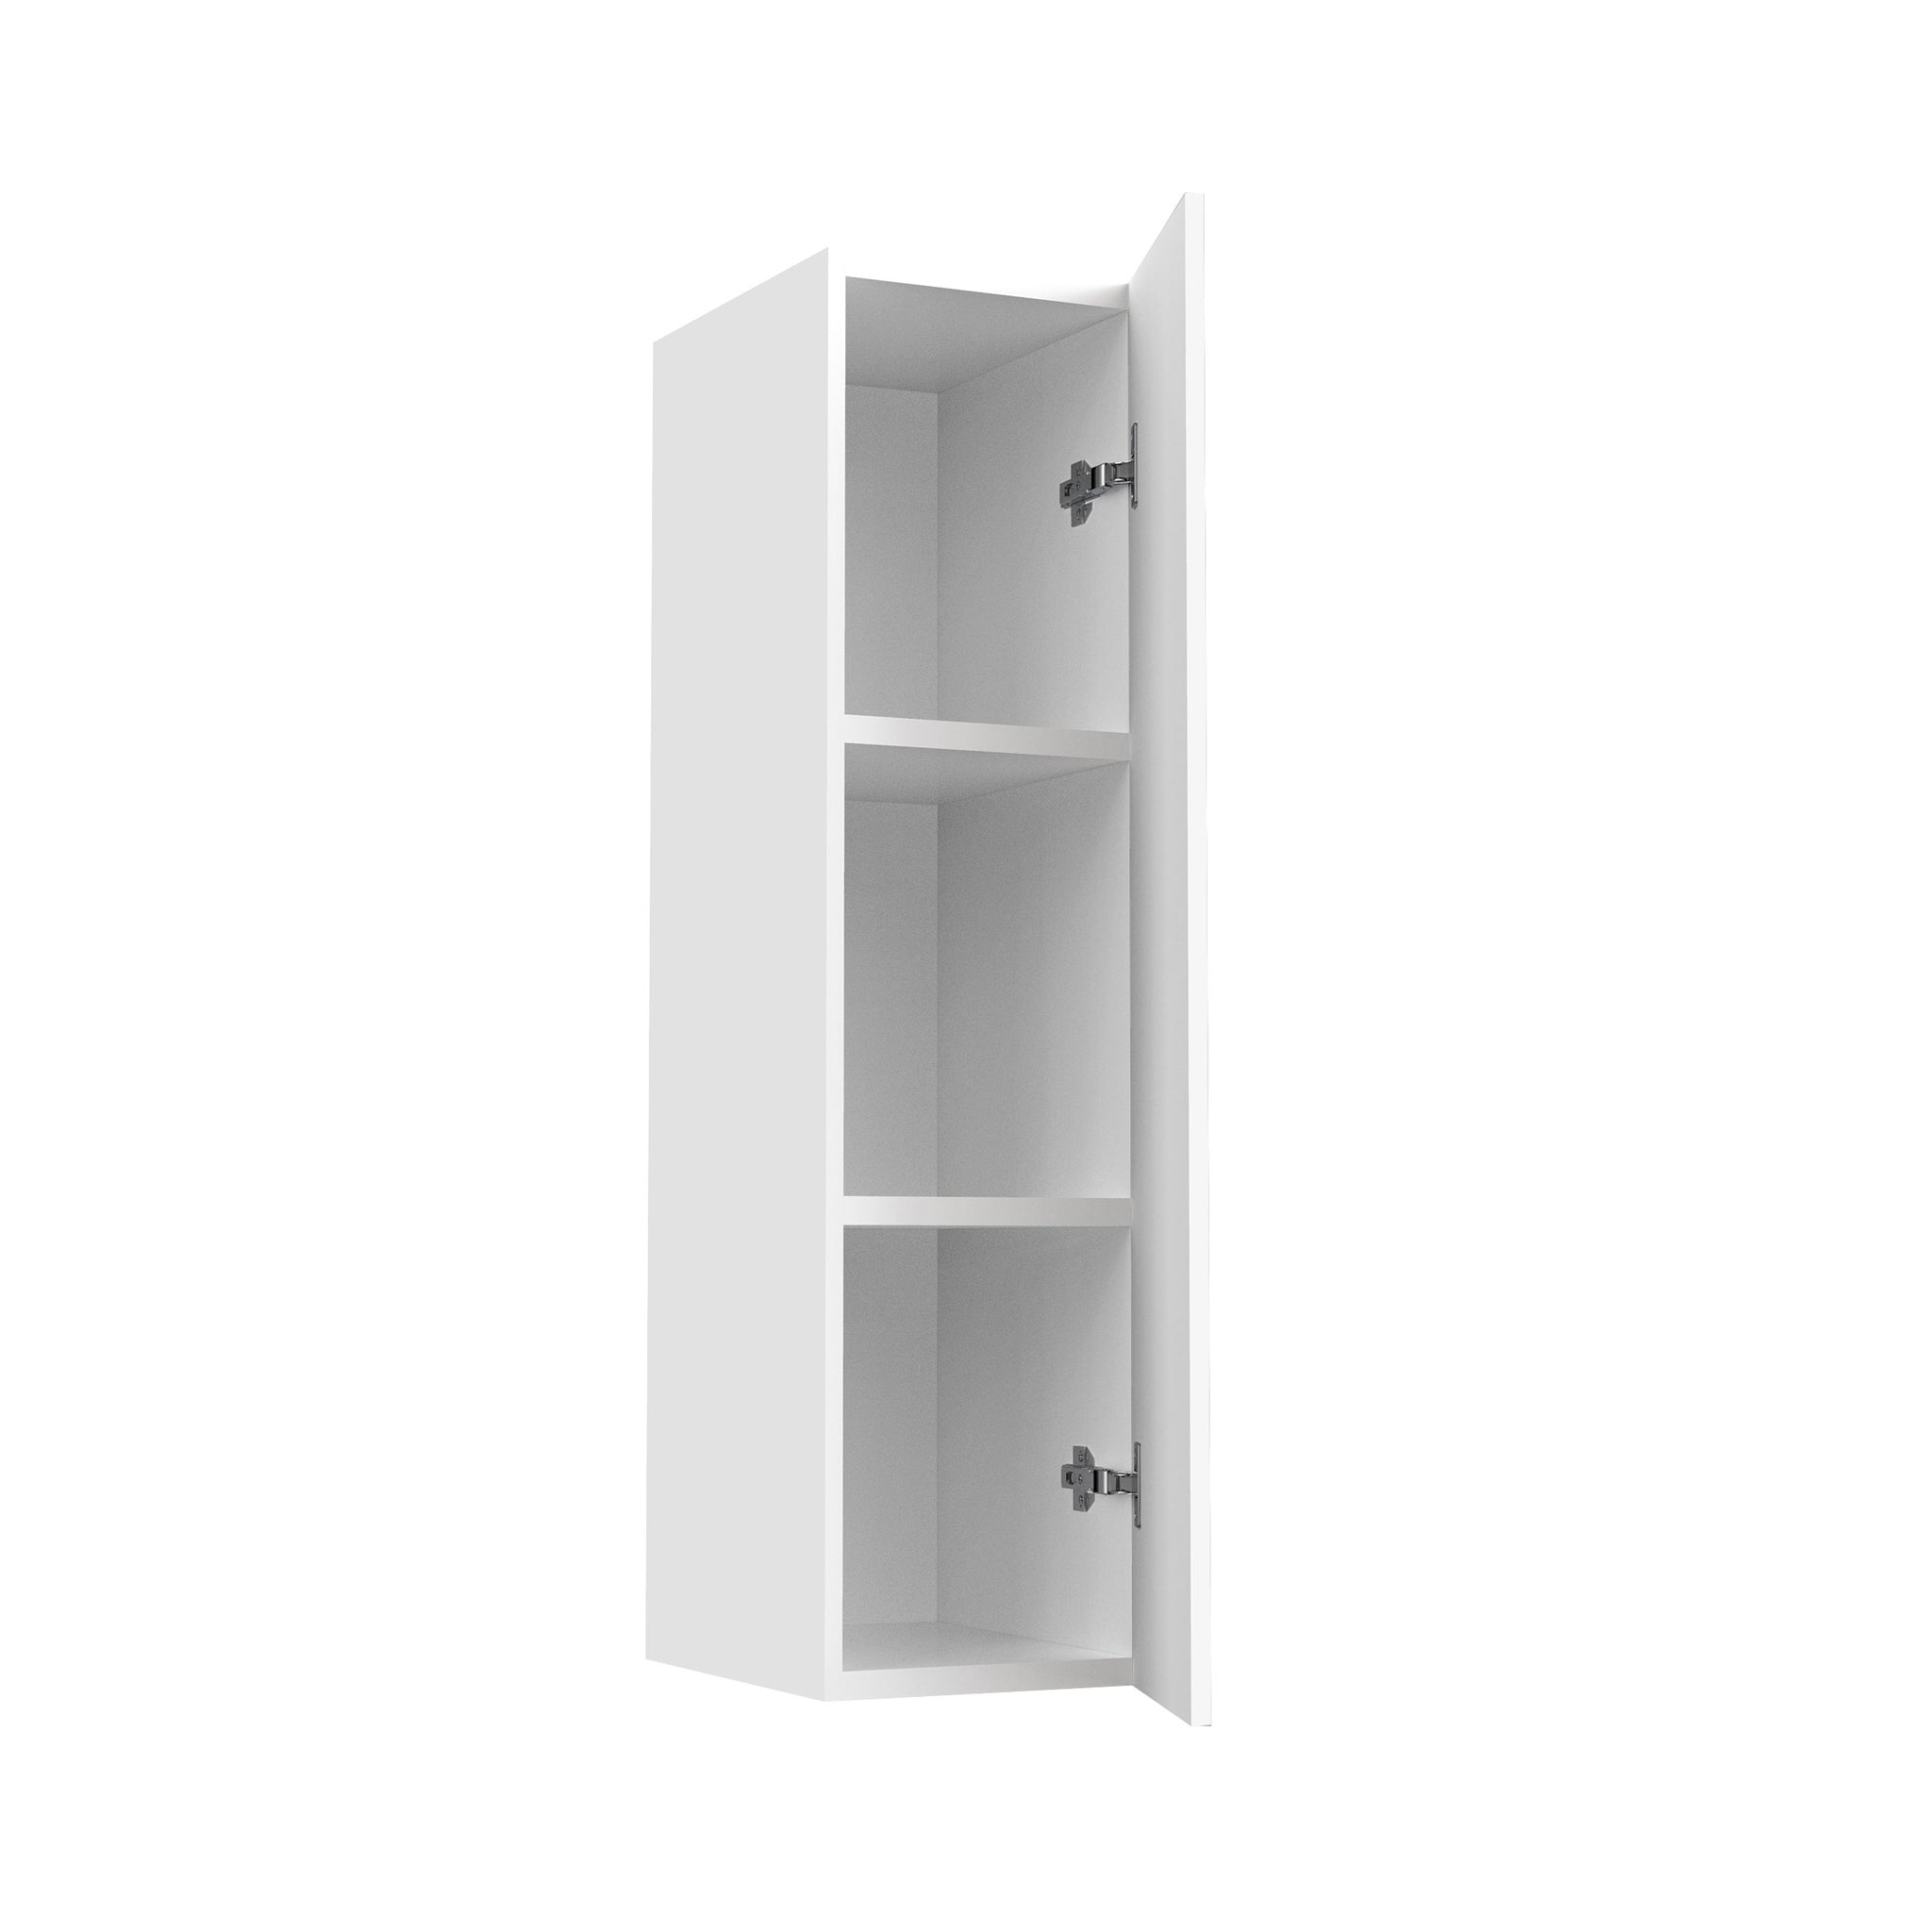 RTA - Glossy White - Single Door Wall Cabinets | 9"W x 36"H x 12"D